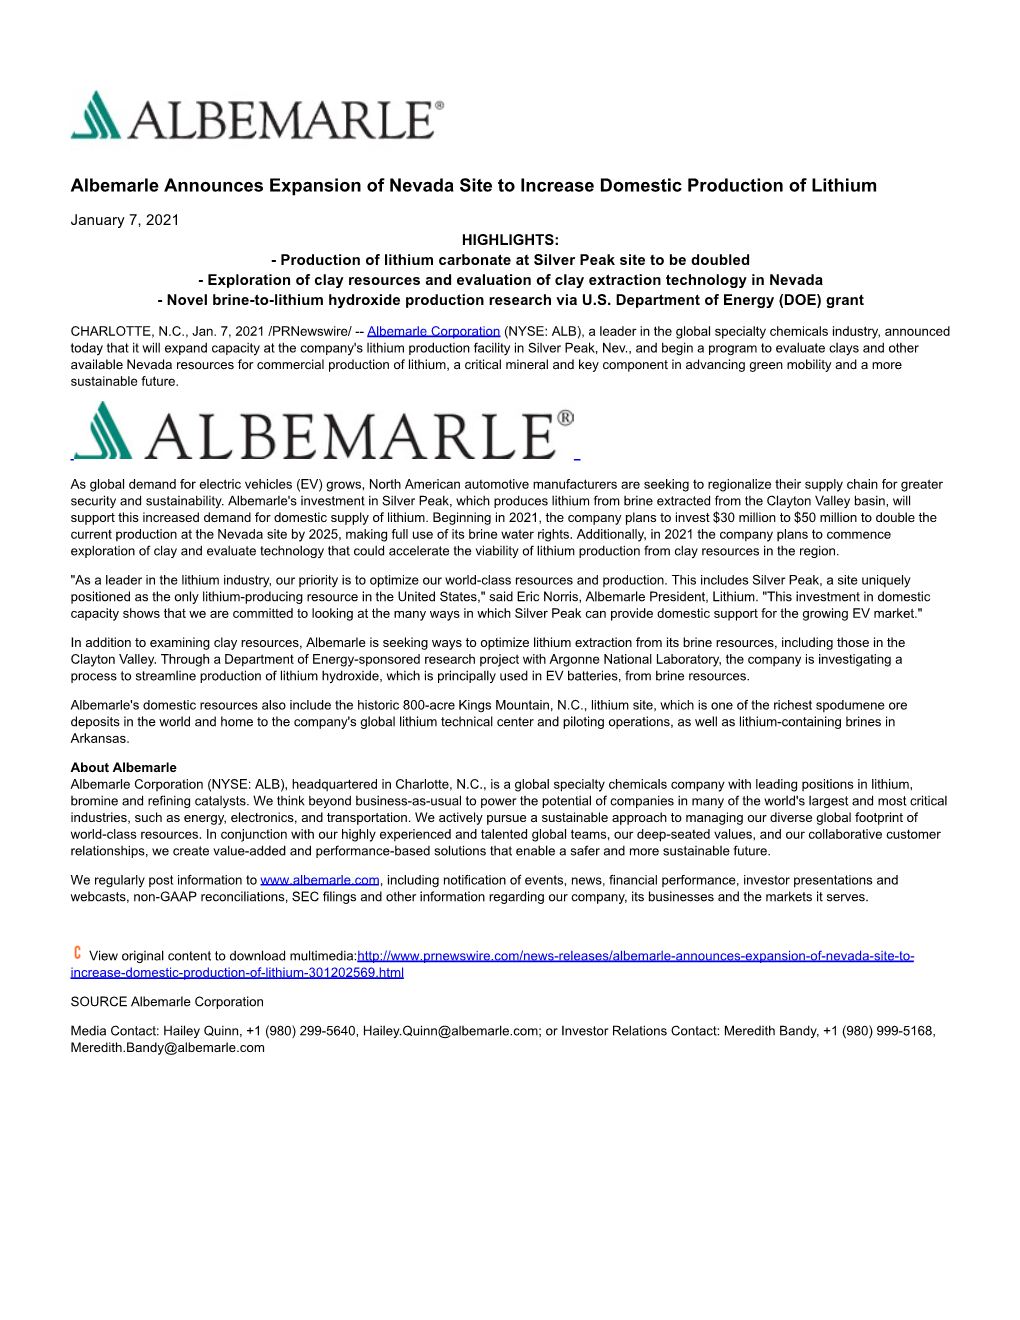 Albemarle Announces Expansion of Nevada Site to Increase Domestic Production of Lithium